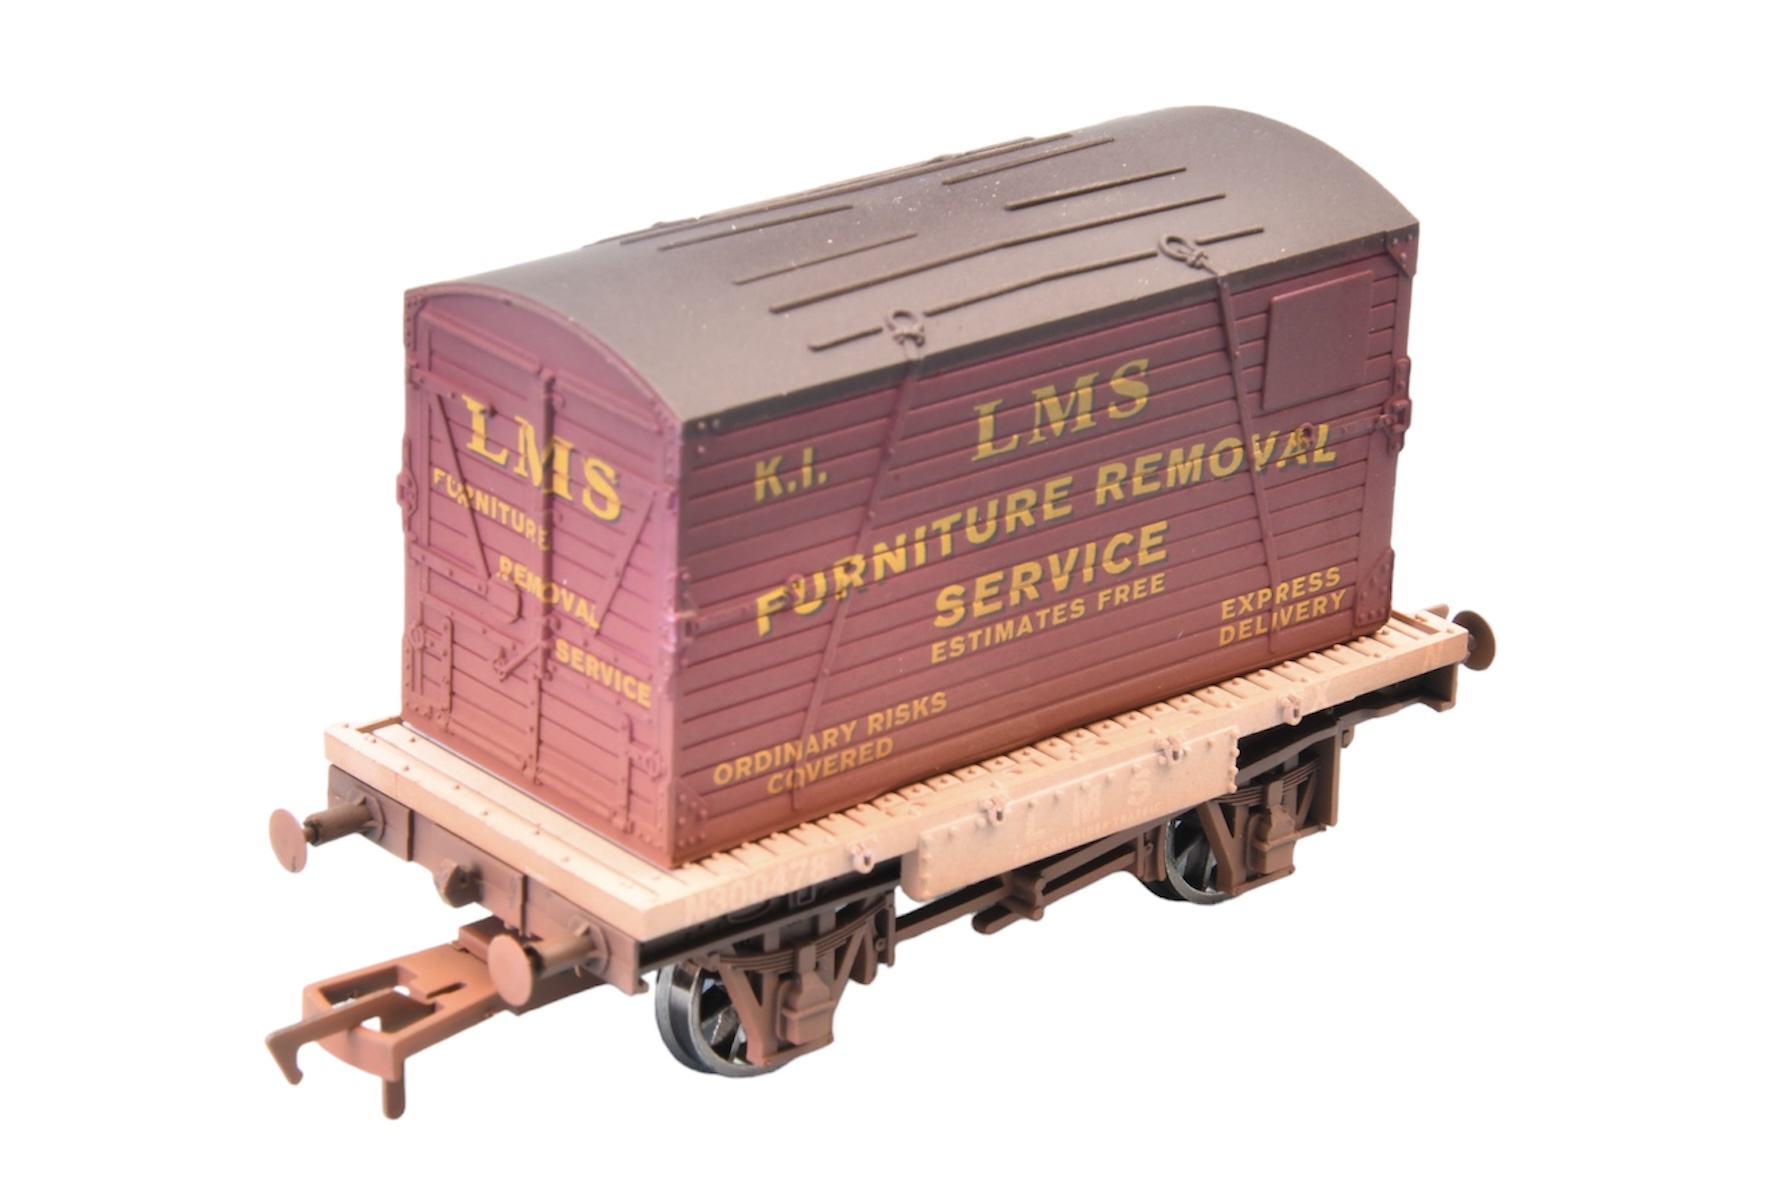 4F-037-010 Dapol Conflat & Container LMS K1. Weathered.